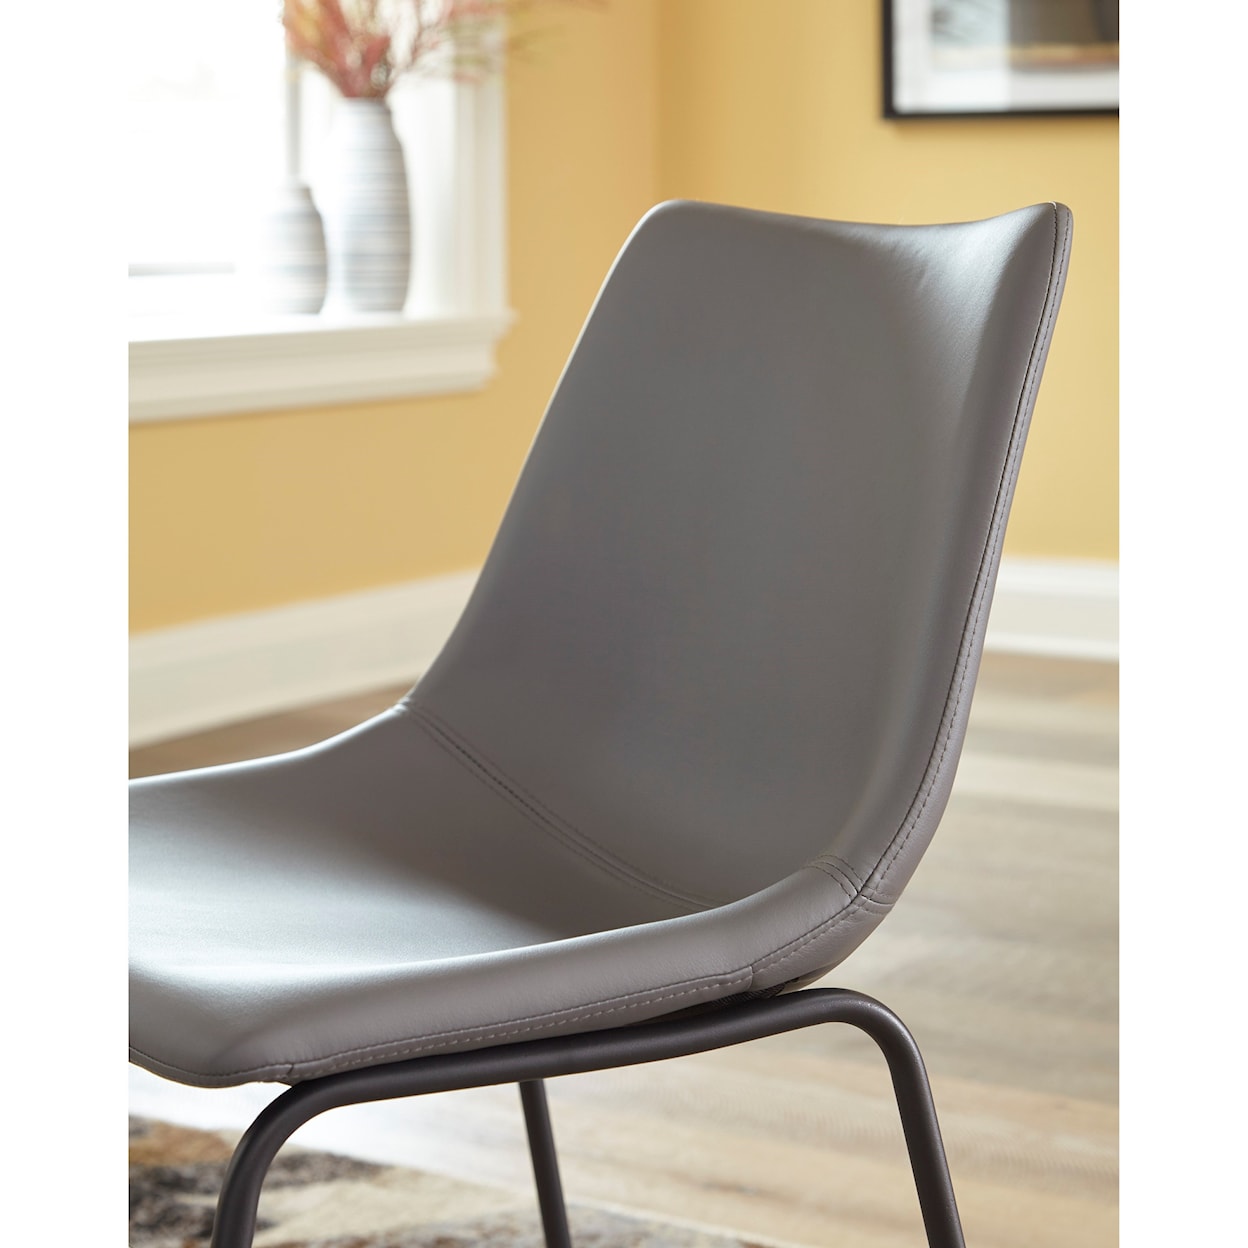 Signature Design by Ashley Centiar Dining Upholstered Side Chair